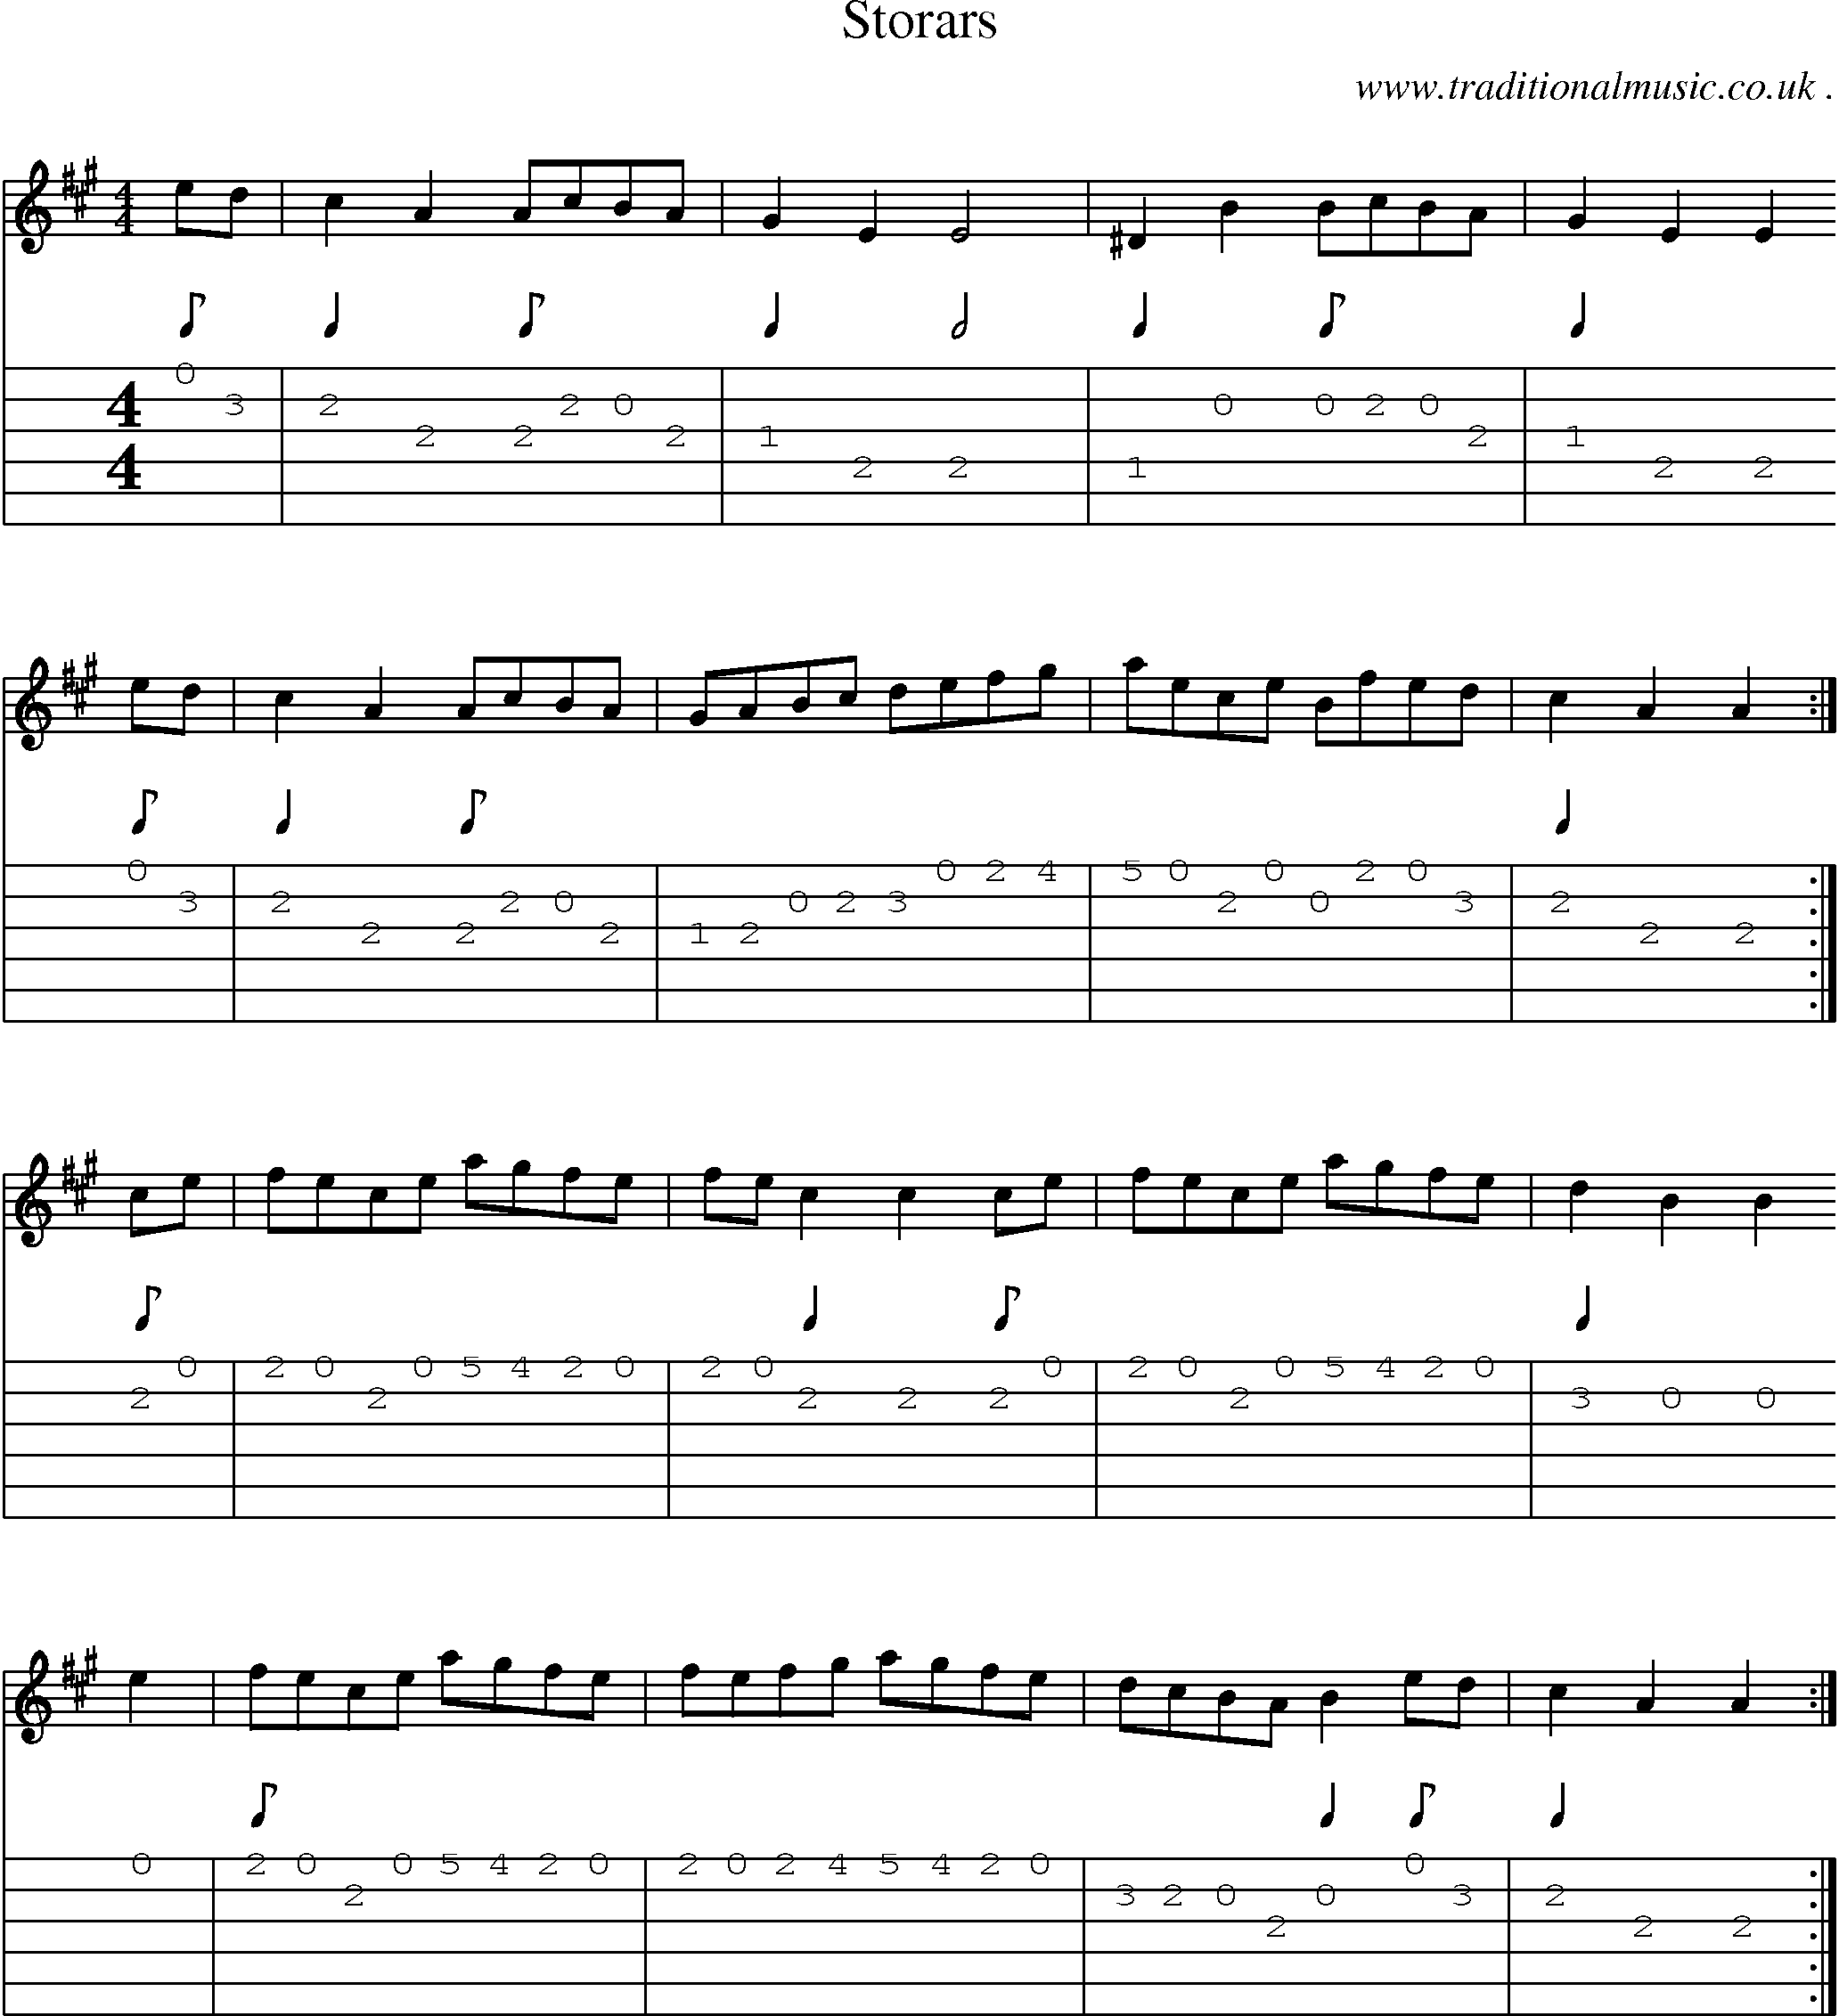 Sheet-music  score, Chords and Guitar Tabs for Storars